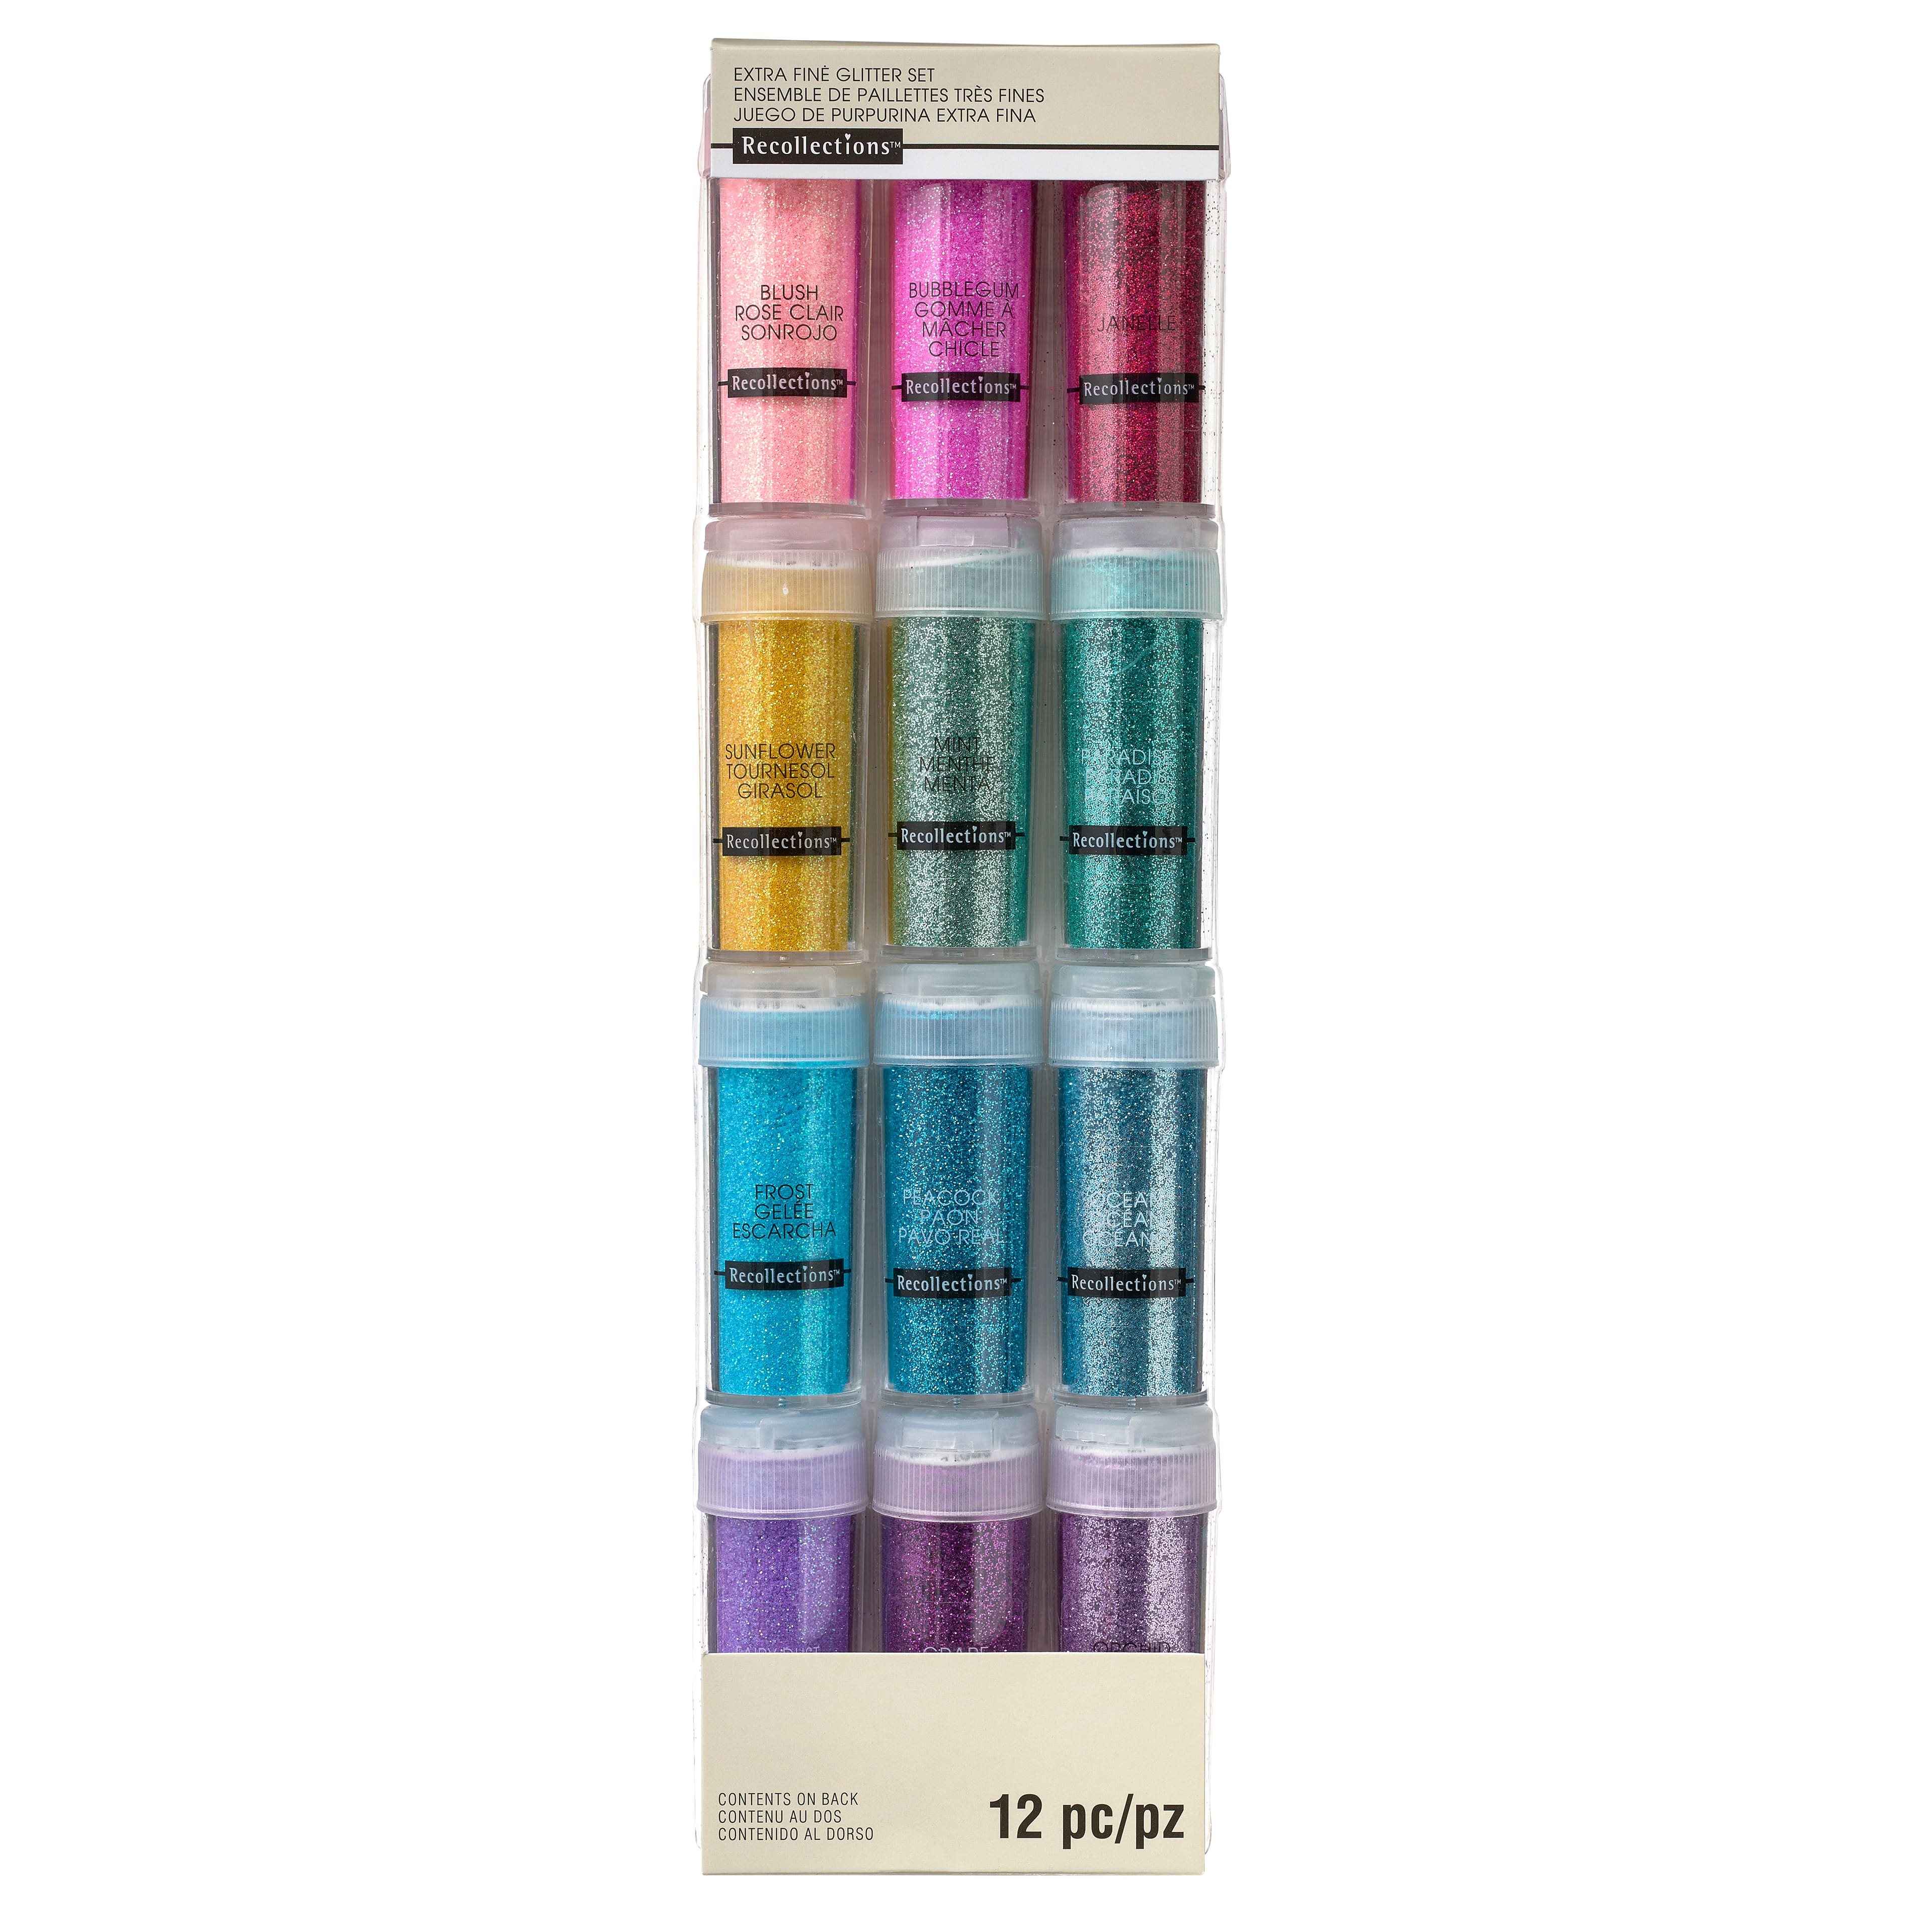 6 Packs: 24 Ct. (144 Total) Extra Fine Glitter Pack by Recollections, Size: 0.34, Assorted